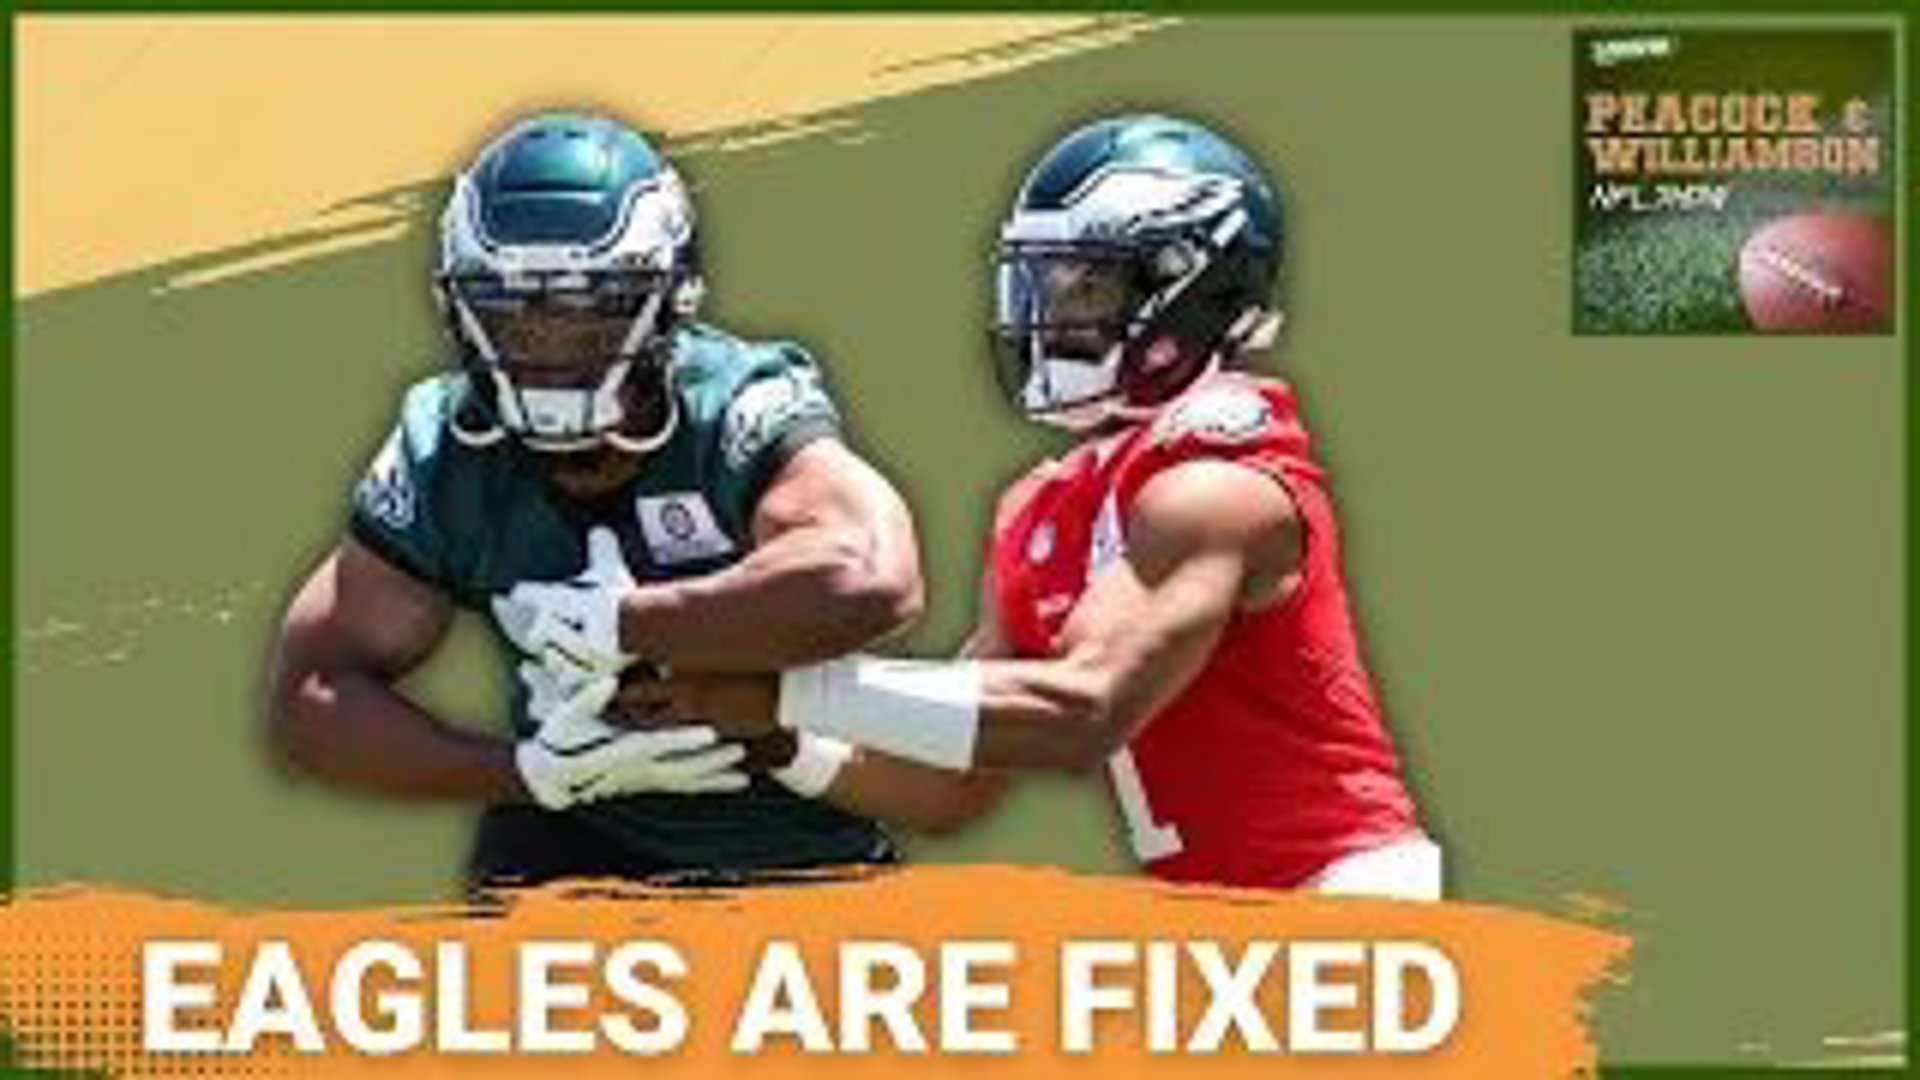 The Philadelphia Eagles are poised to reclaim the NFC title following an offseason in 2024 with additions like Saquon Barkley, Quinyon Mitchell, Cooper DeJean & more